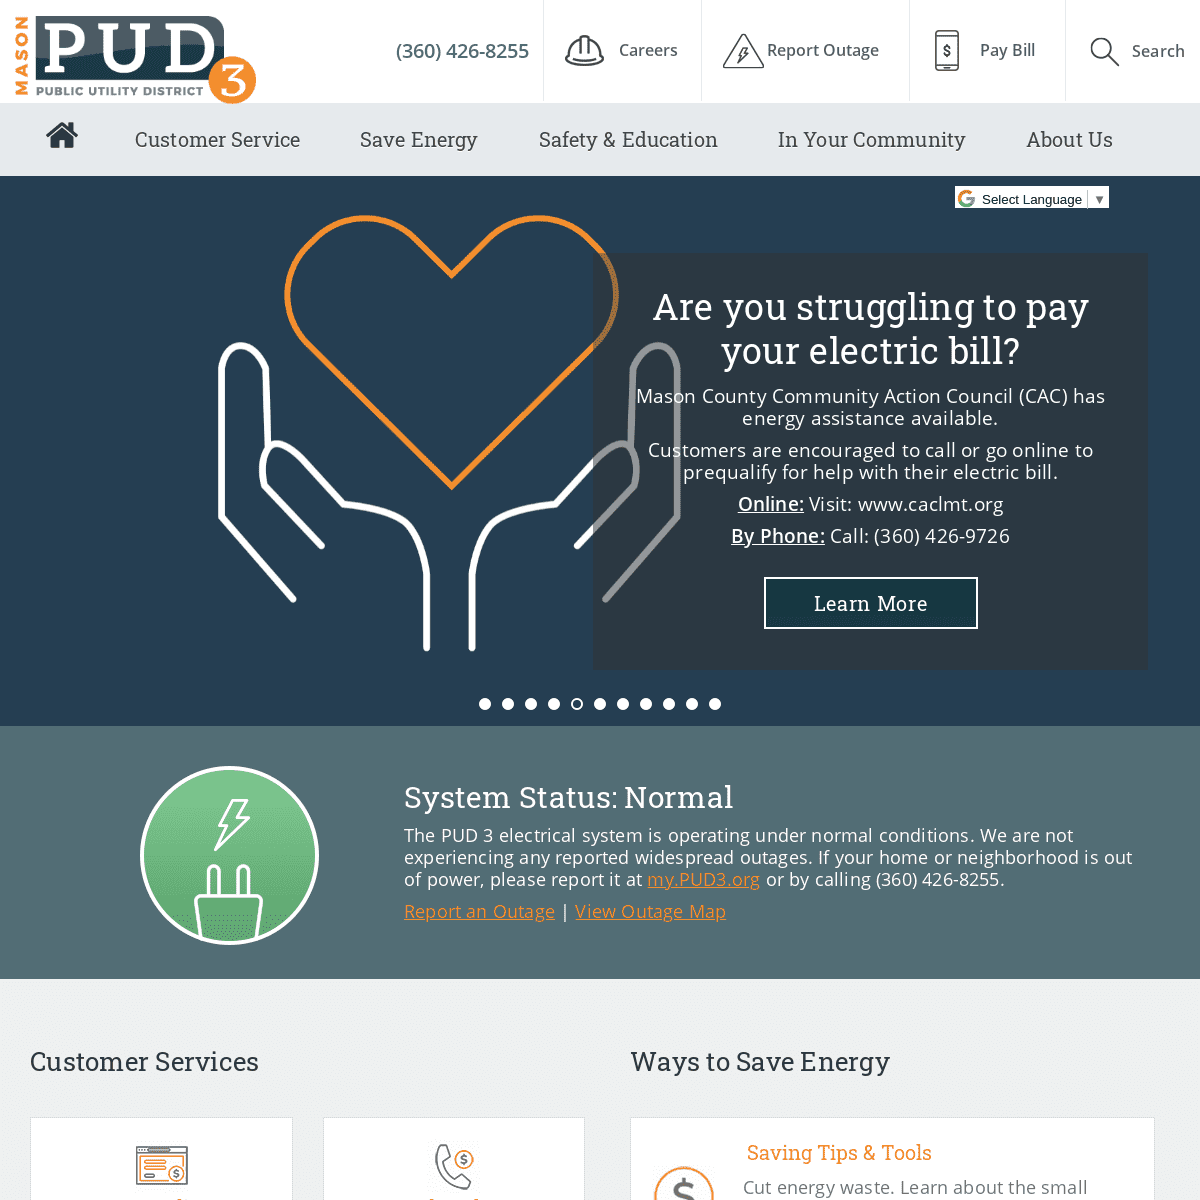 A complete backup of https://pud3.org